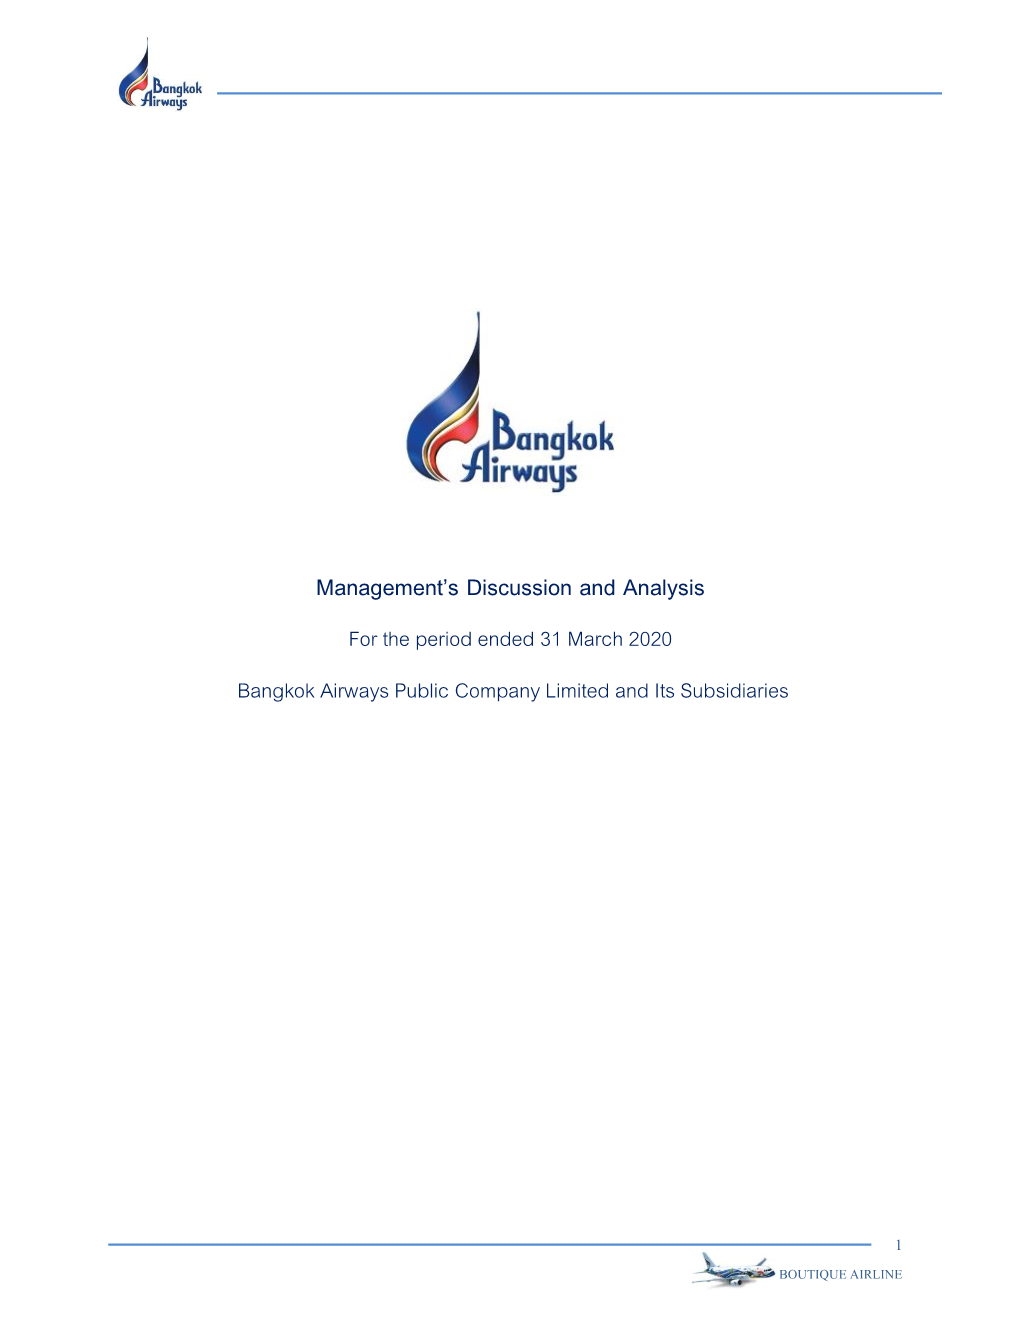 For the Period Ended 31 March 2020 Bangkok Airways Public Company Limited and Its Subsidiaries